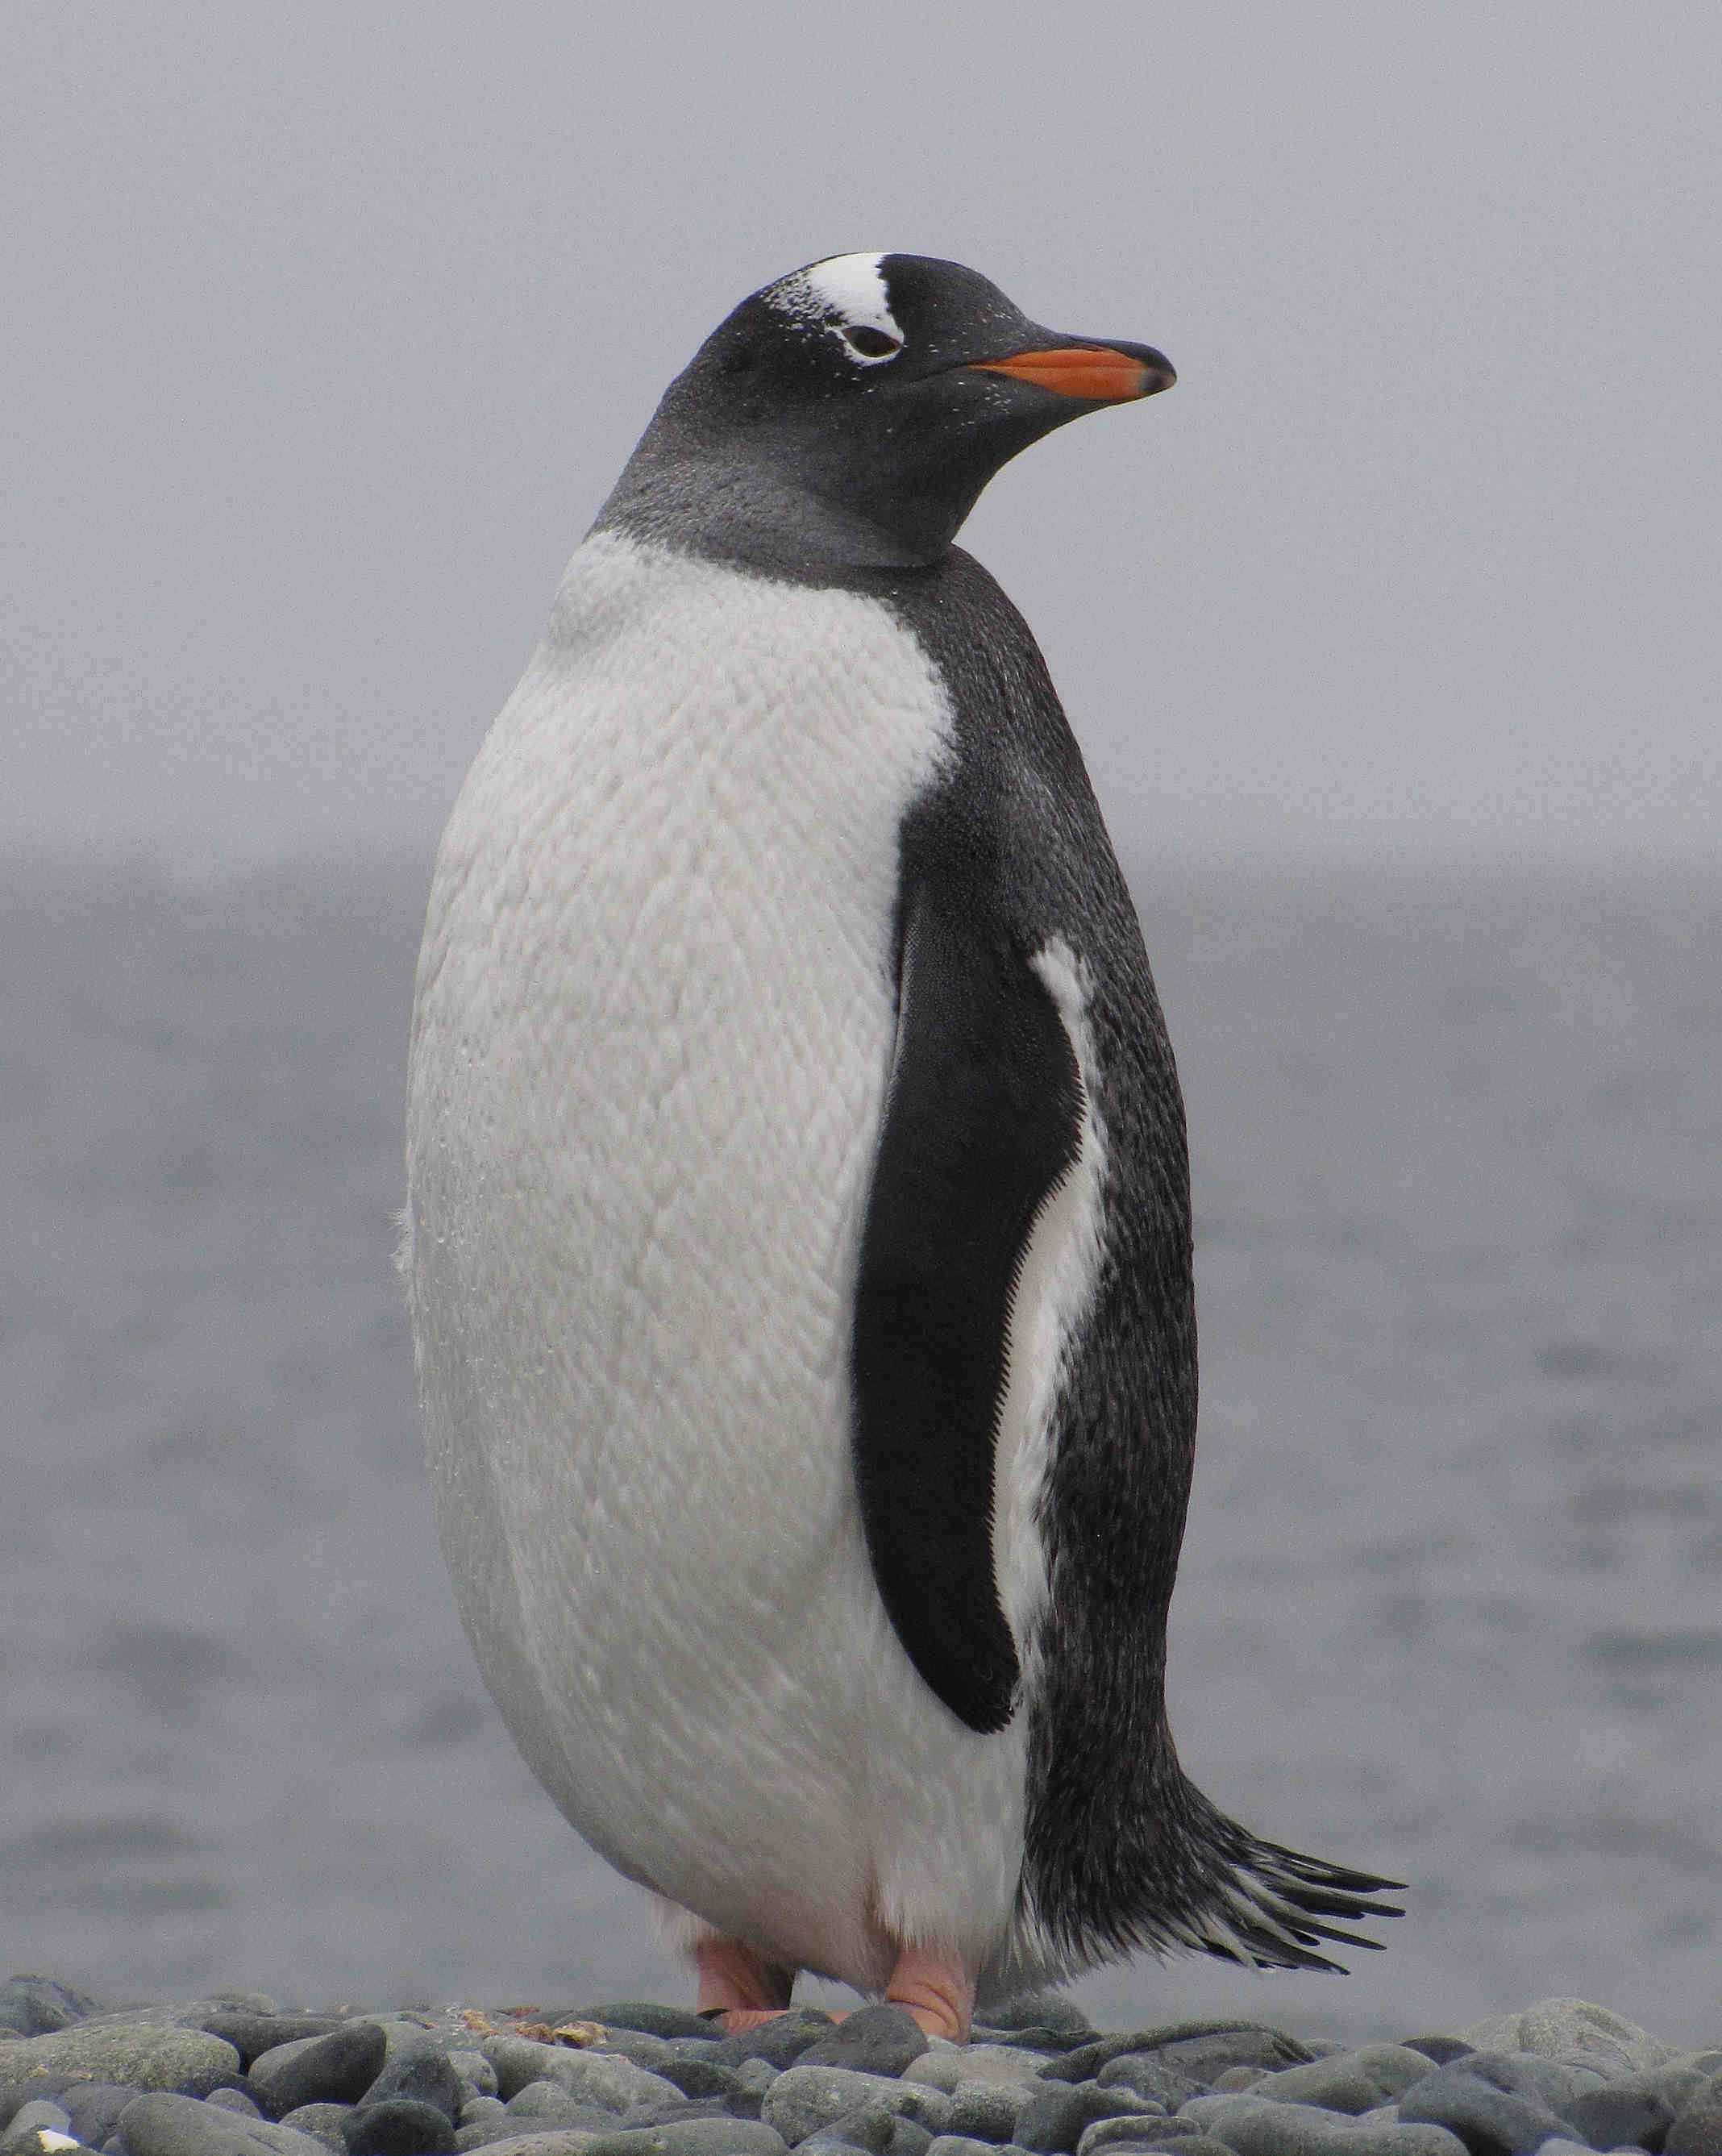 What animals live in the South Pole?